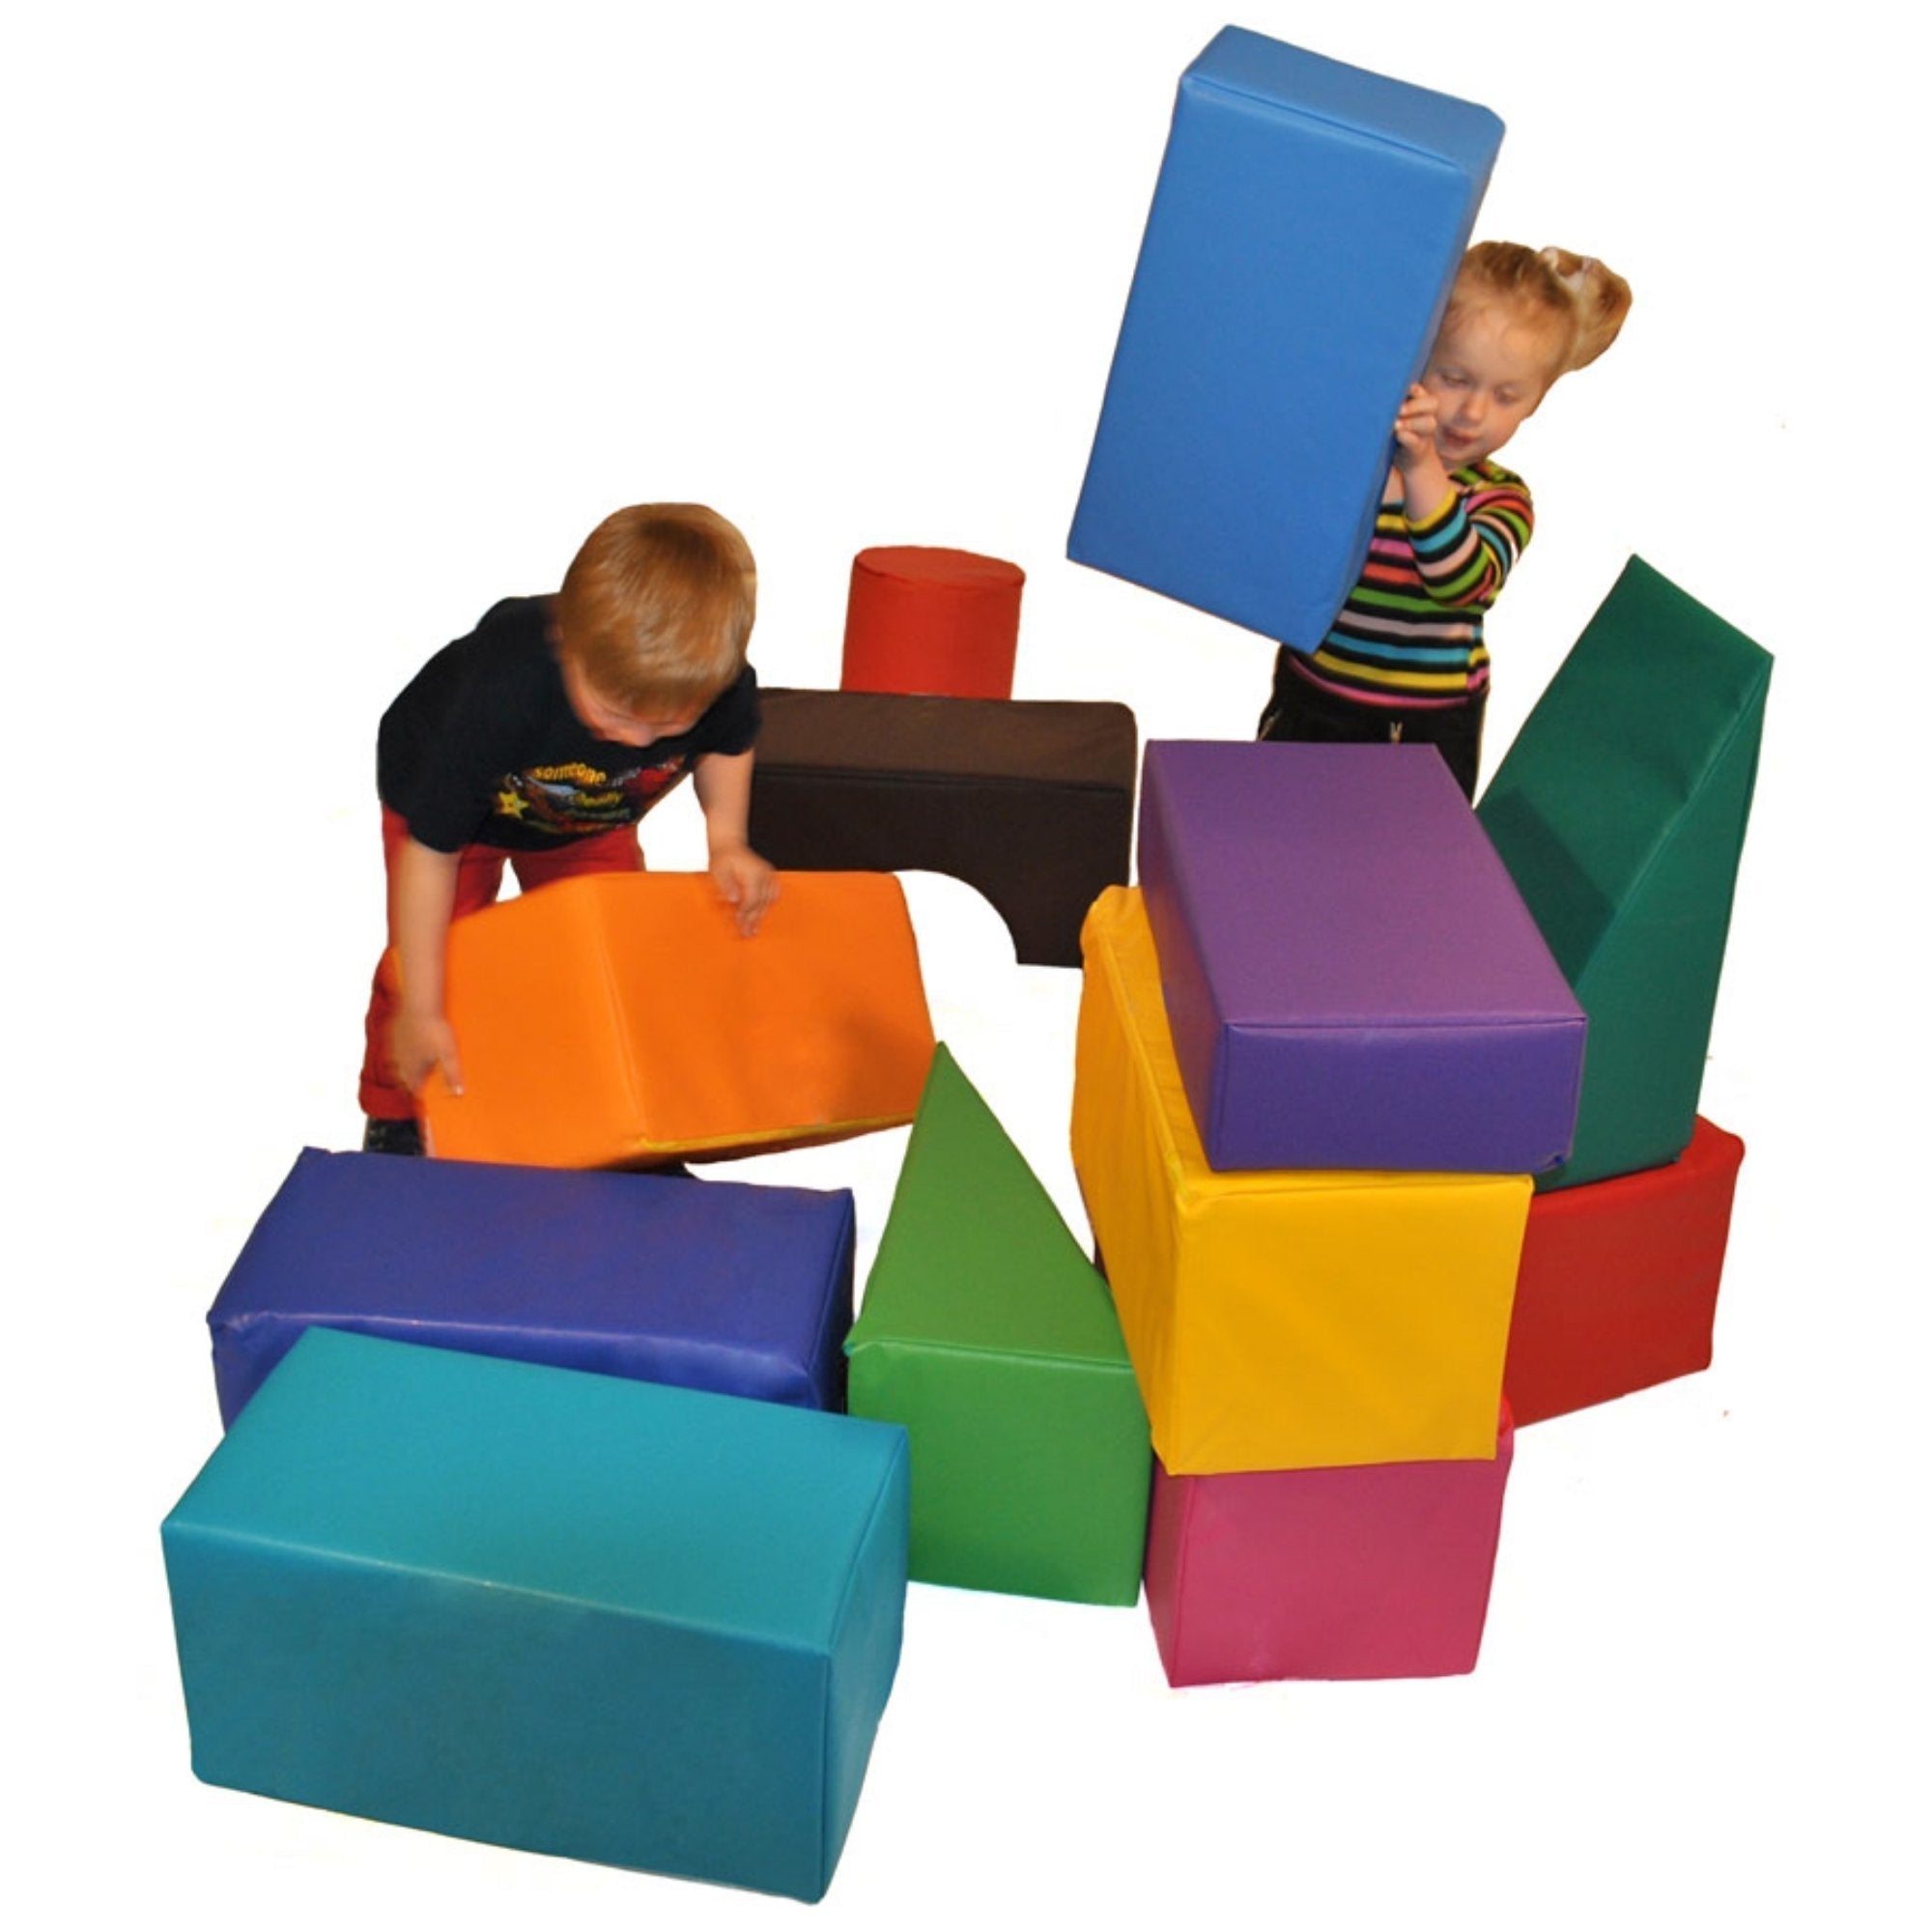 Construction Soft Play Set, This Construction Soft Play Set is a must for any nursery. The Construction Soft Play Set contains square, rectangular, wedge and cylinder shaped blocks in different sizes and colours. As children learn to play with them they develop both basic physical skills and important conceptual skills. The shapes look great and provide limitless fun while stimulating imagination. This set is designed with larger pieces for children up to 8 years. The pieces are completely wipe clean and co